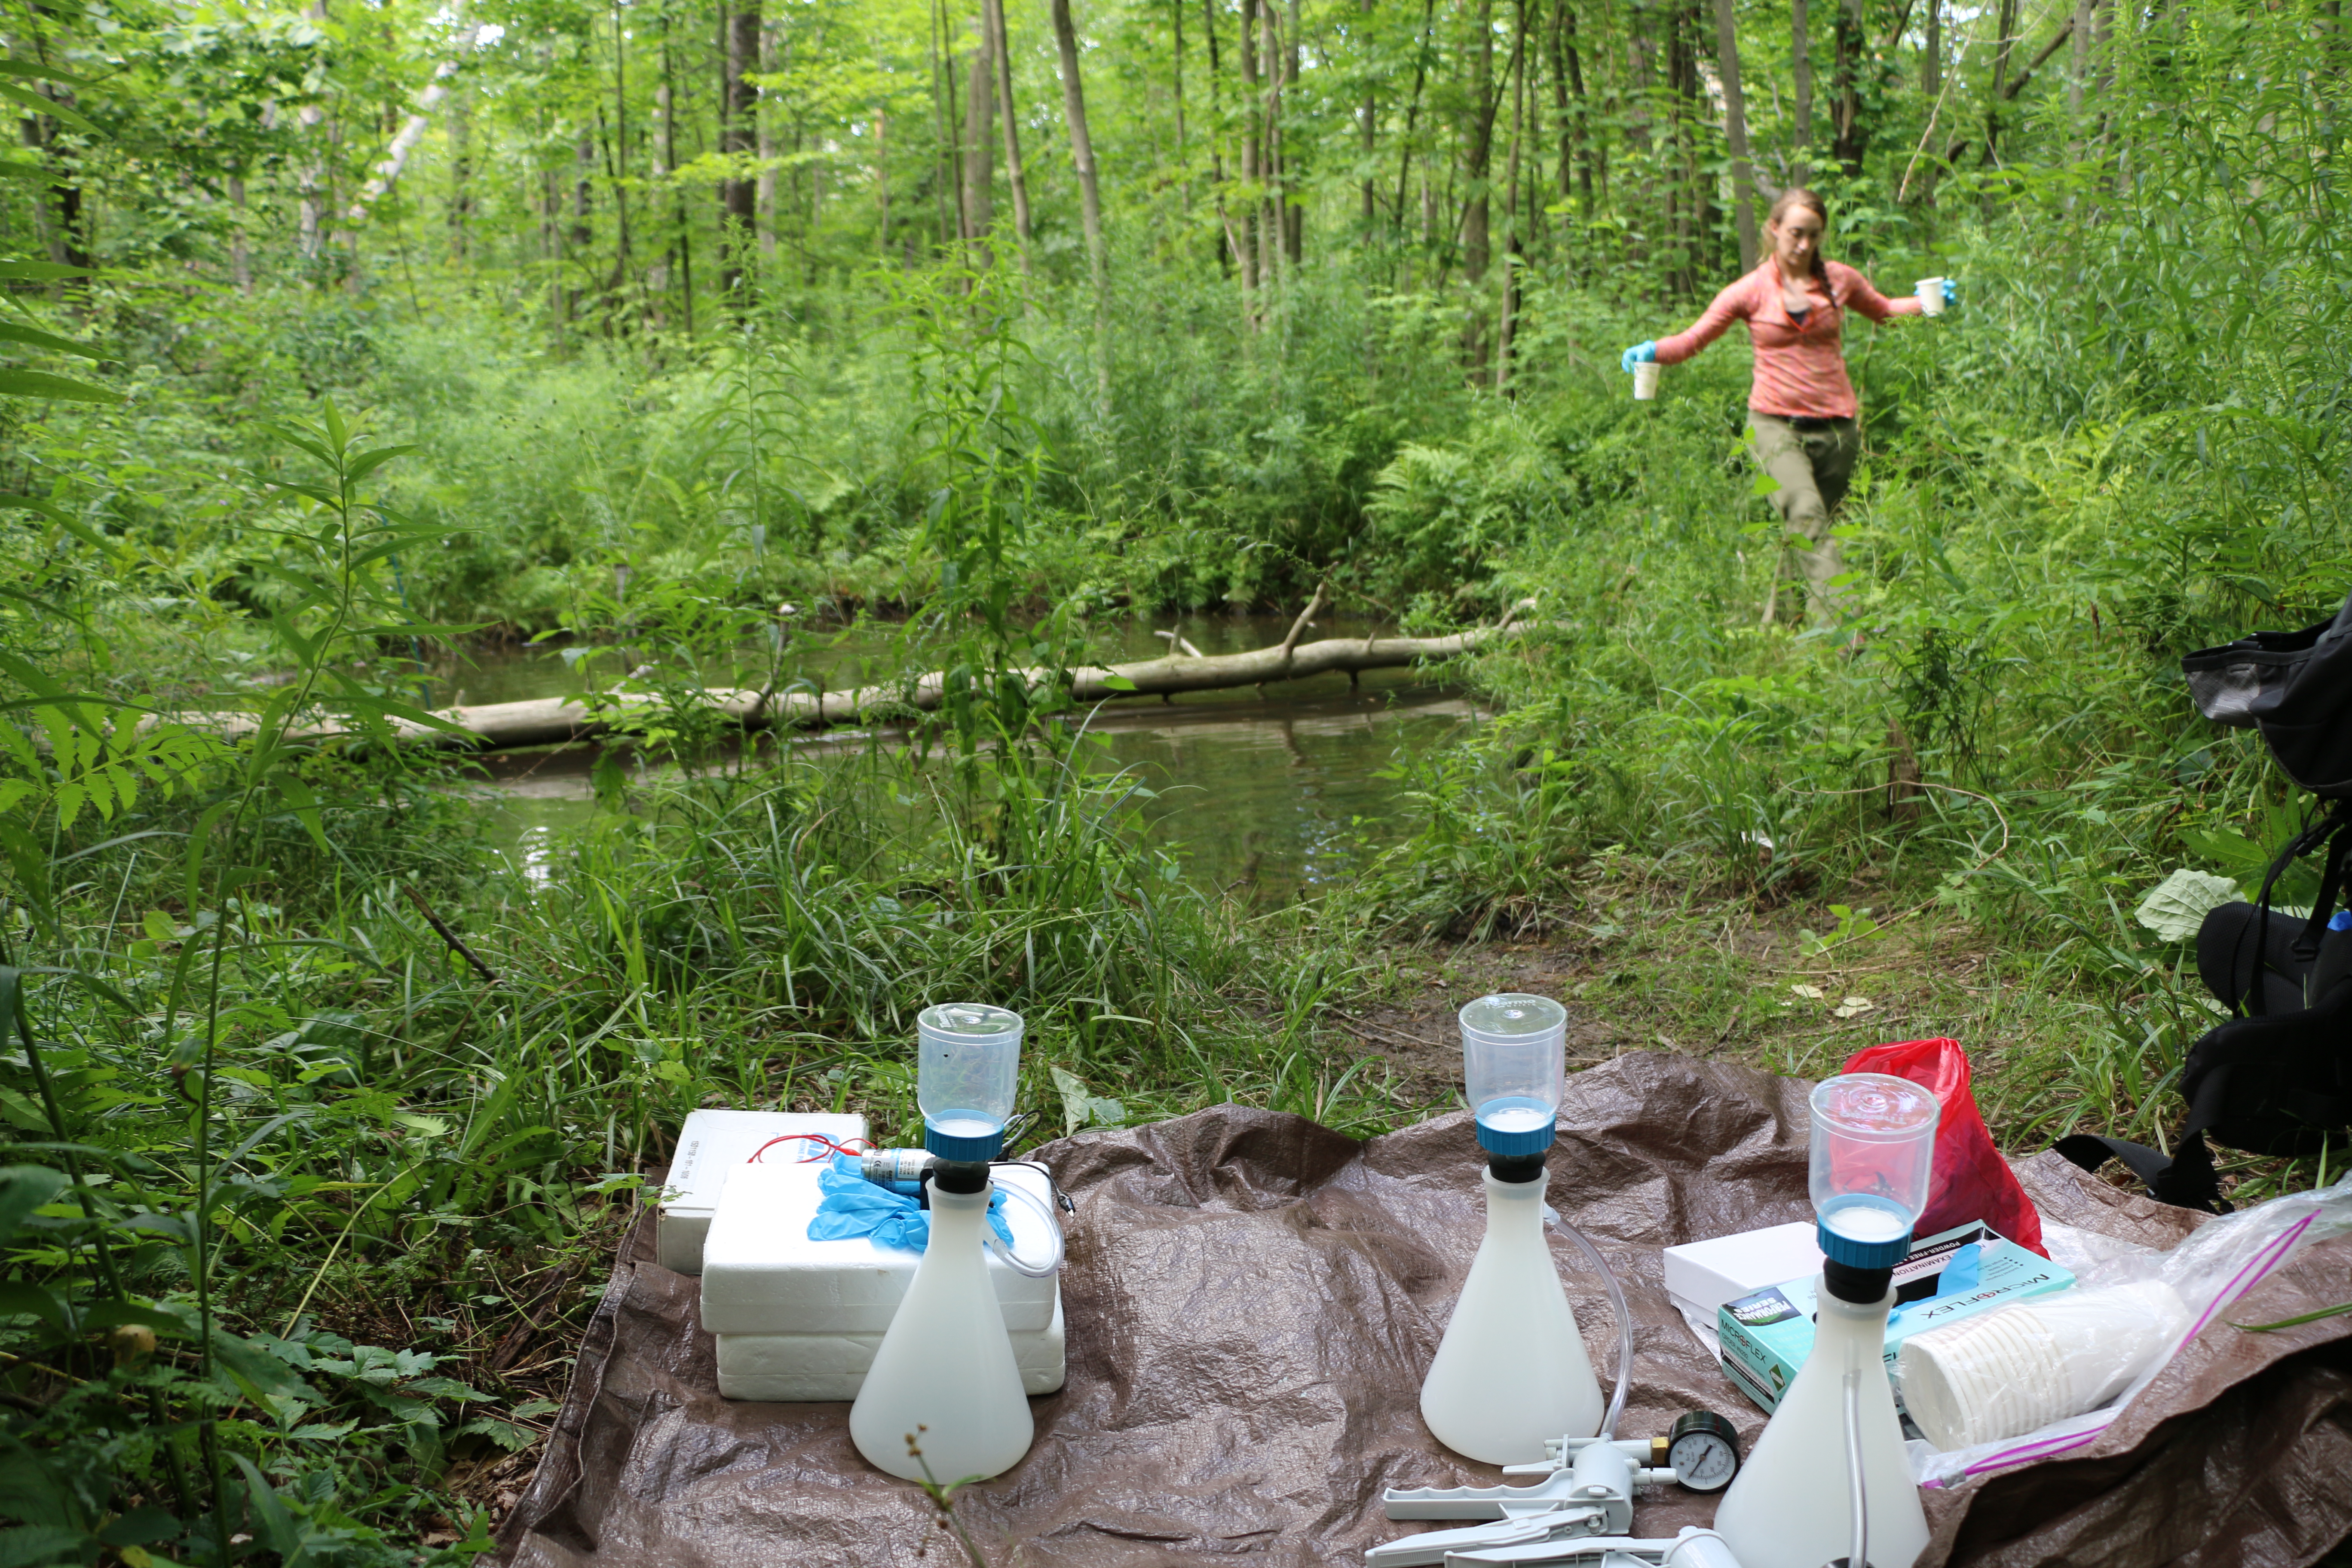 Alyssa Kaganer collecting samples from a stream.